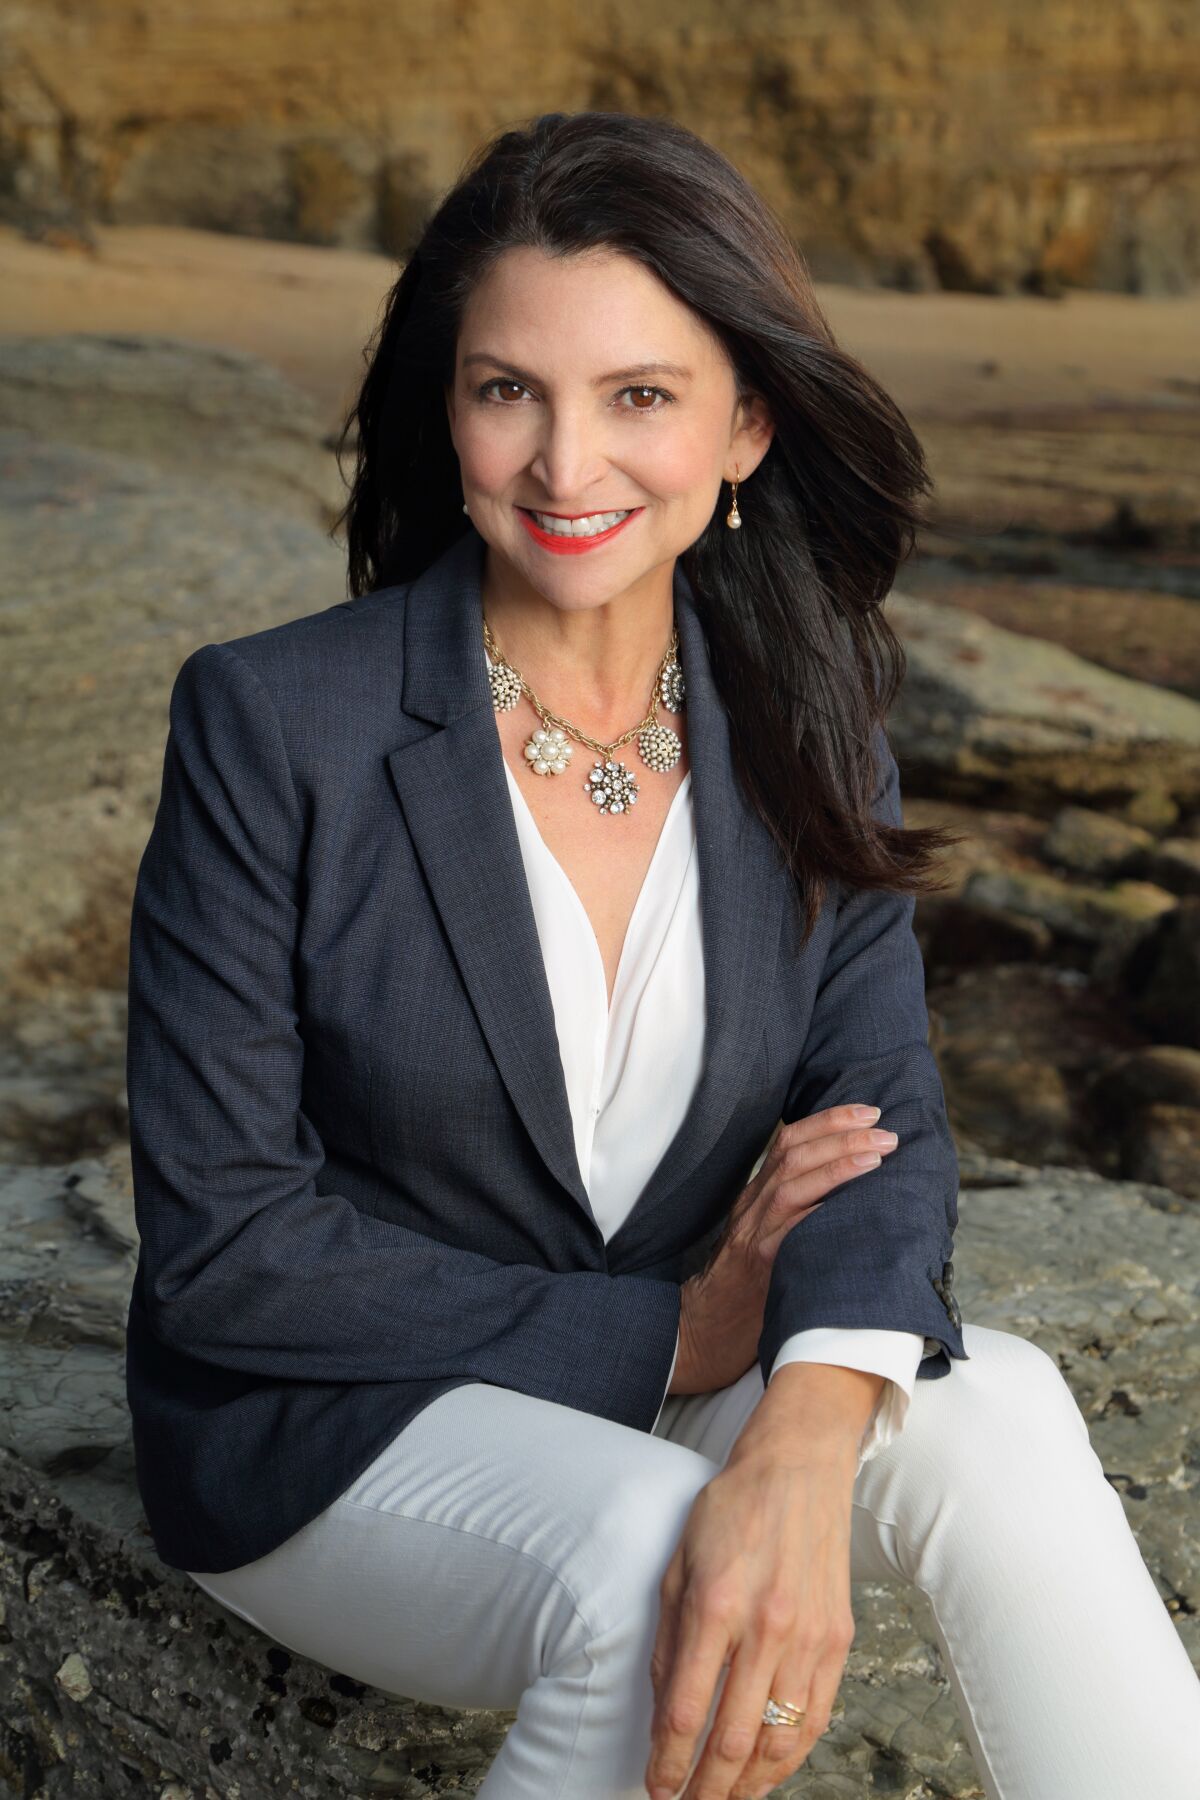 Rosamaria Acuña is a coastal real estate specialist with Berkshire Hathaway HomeServices California Properties.